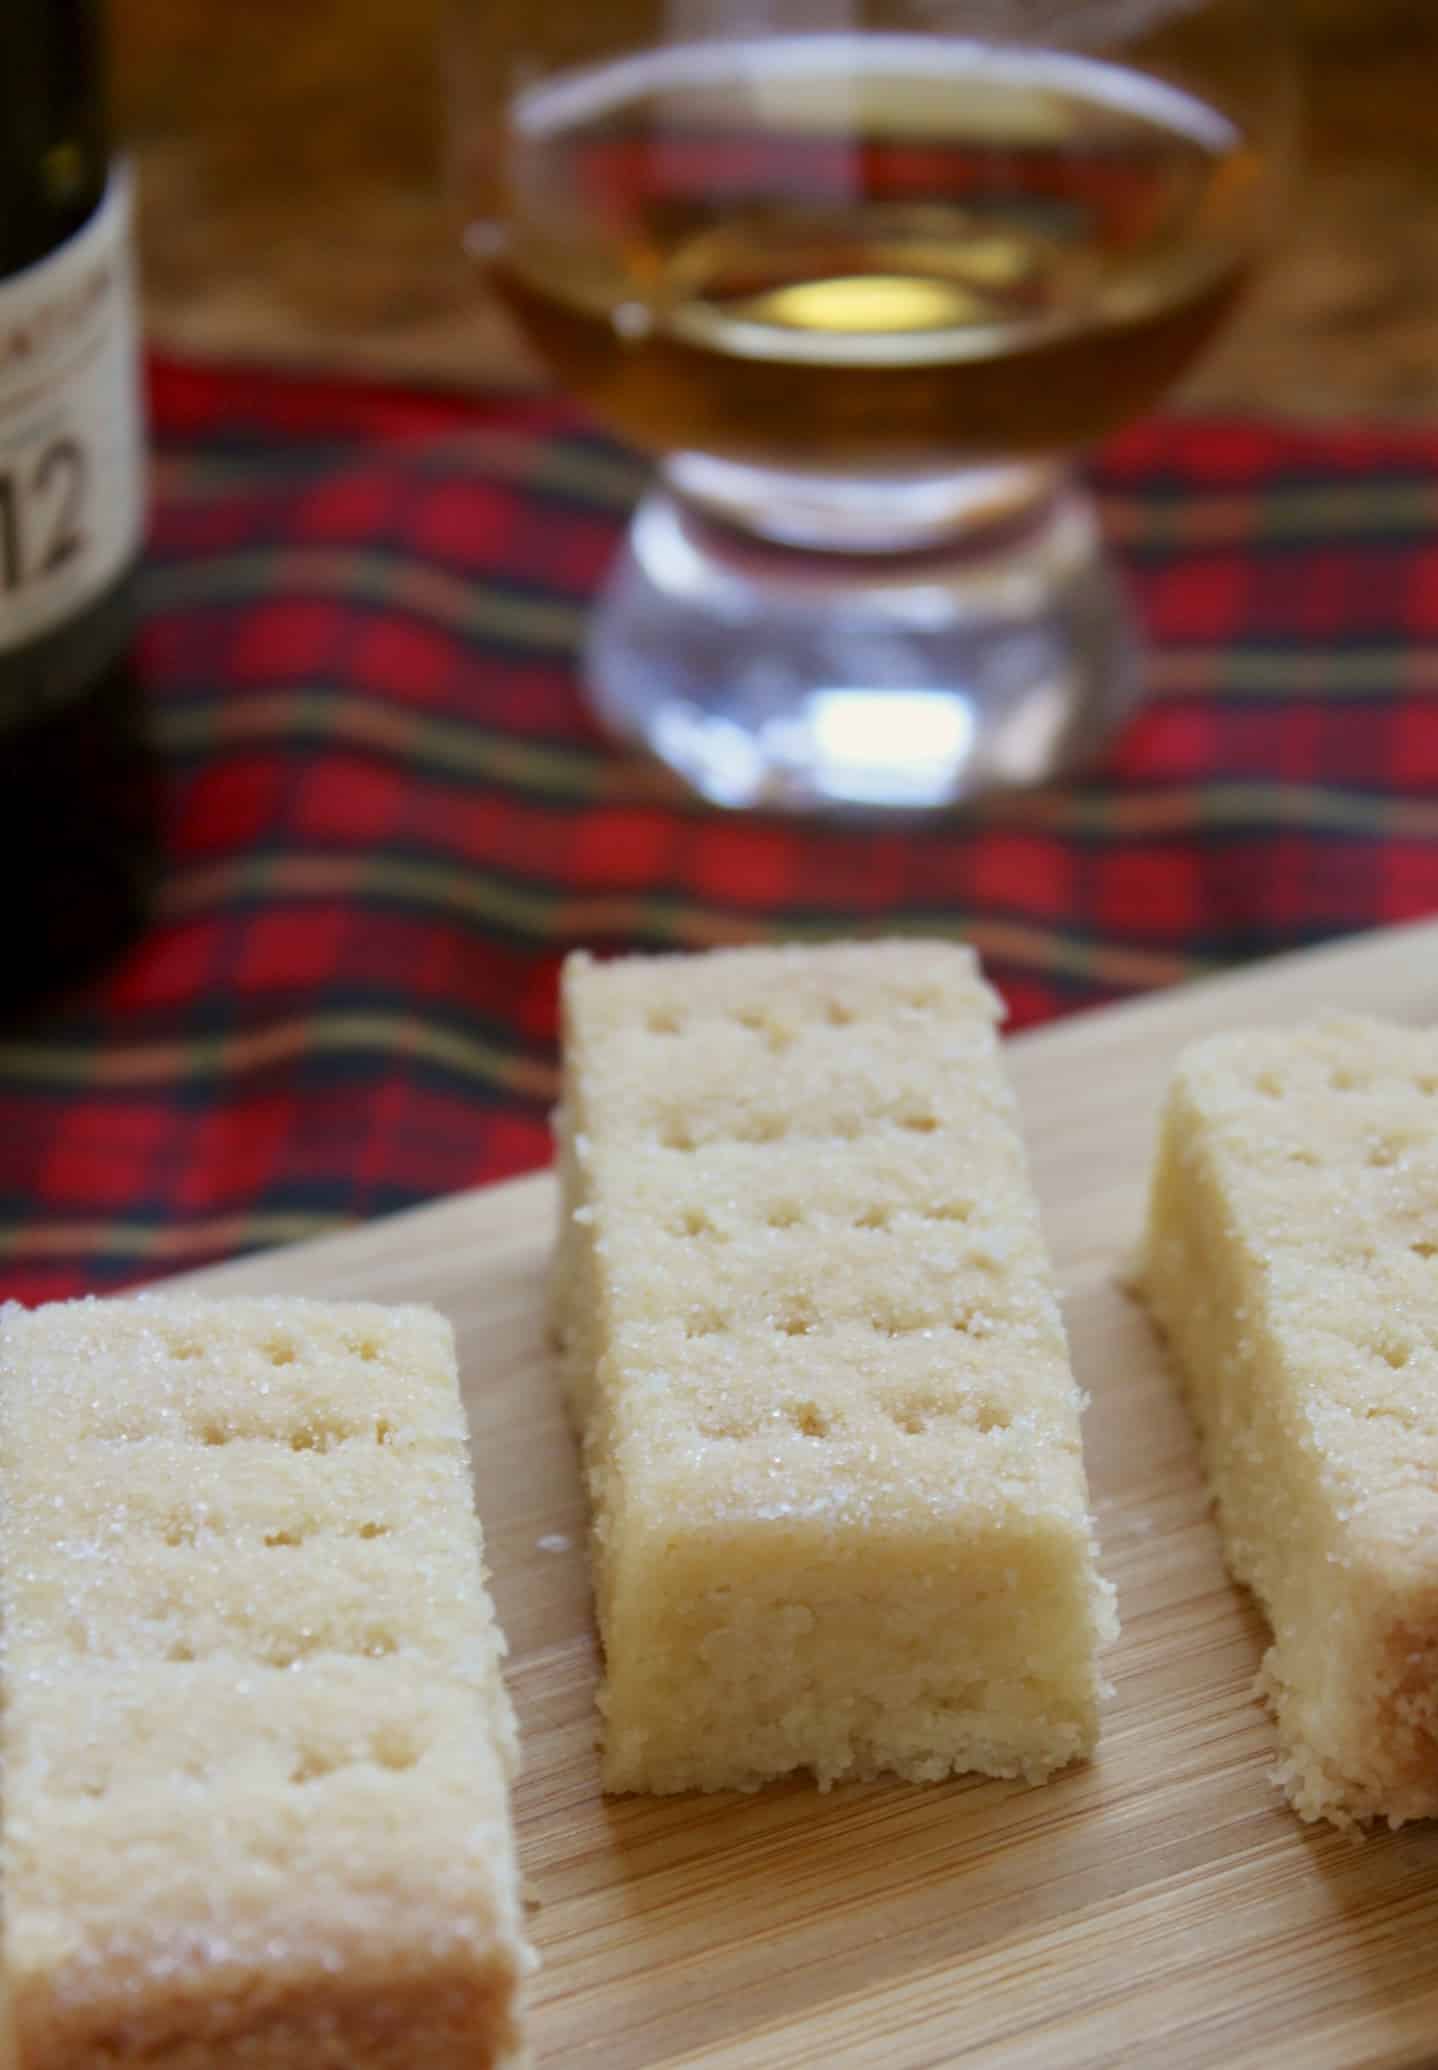 Scottish Shortbread - 4 ingredients to traditional perfection.